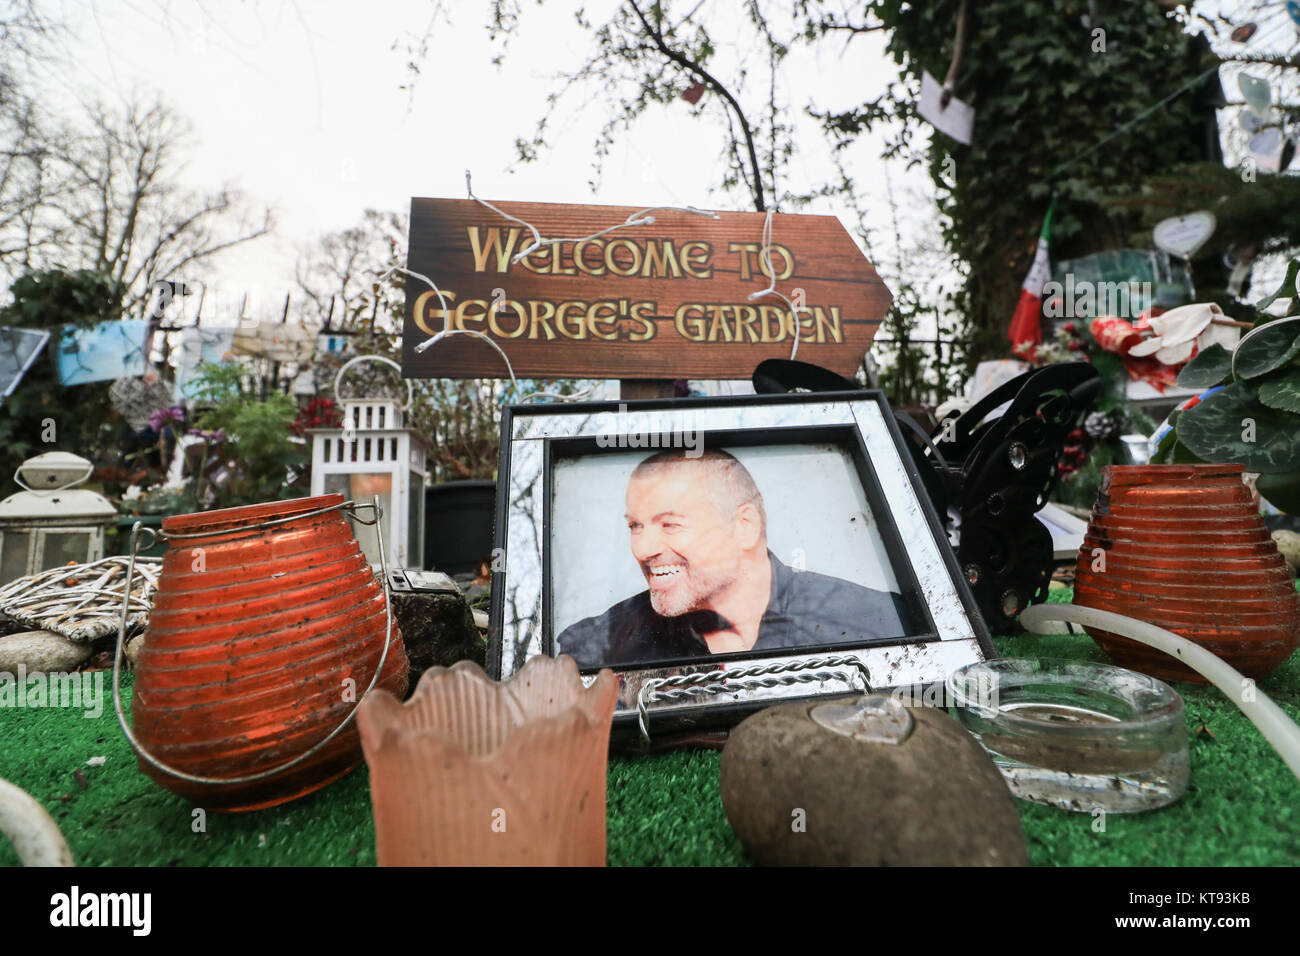 London, UK. 23rd Dec, 2017. The first anniversary  approaches of the death of British and International pop legend  George Michael  who died in Goring on Thames on 25 December 2016. Many devoted fans continue to visit and leave posthumous  tributes including  handmade items, flowers, posters and photographs at the George Michael memorial garden  set up outside the singer's former home in North London Credit: amer ghazzal/Alamy Live News Stock Photo